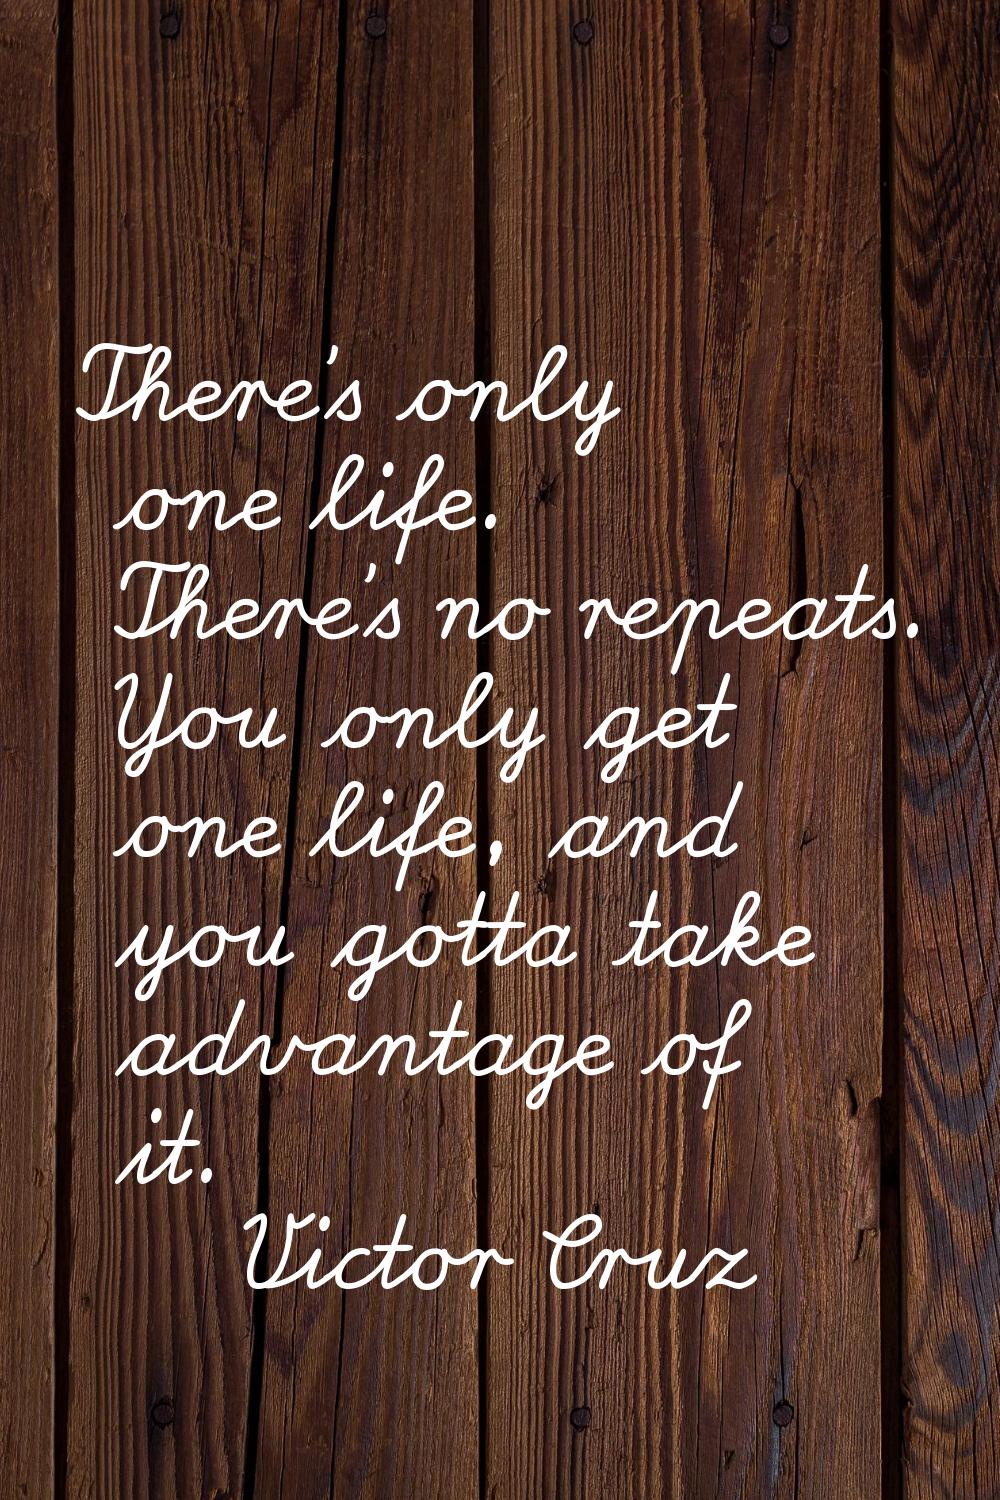 There's only one life. There's no repeats. You only get one life, and you gotta take advantage of i